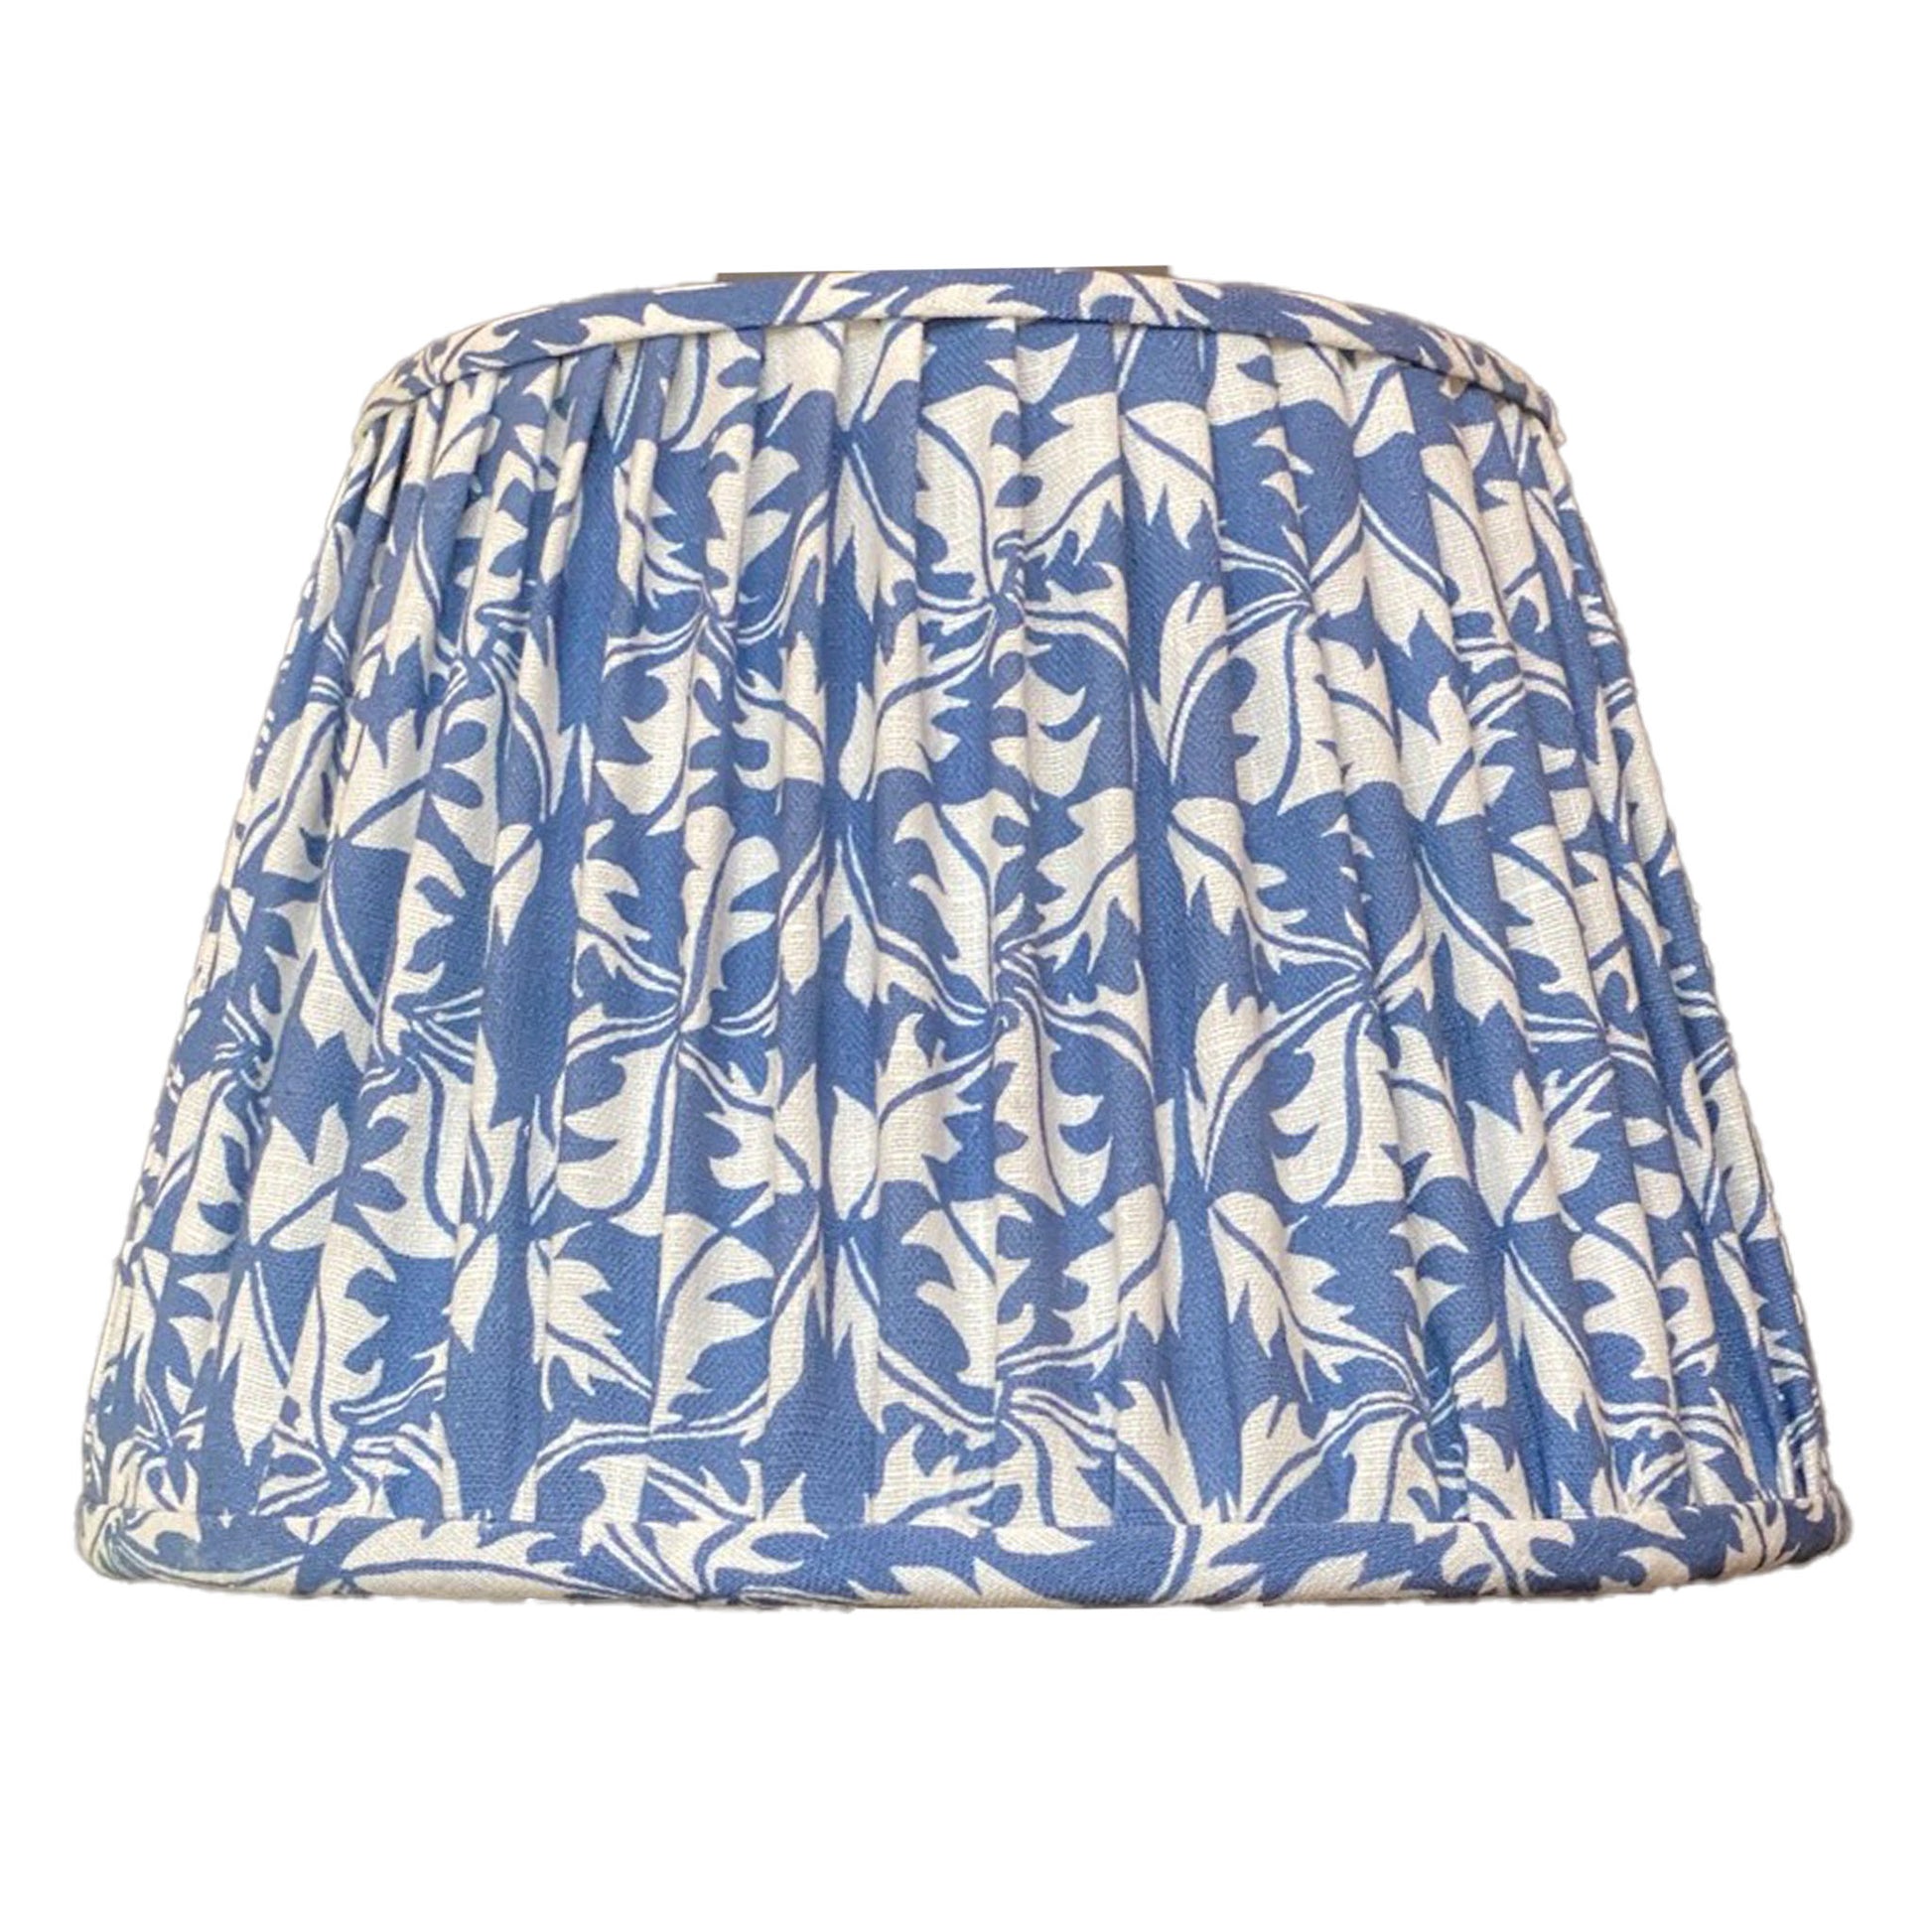 Blue and white screen print cotton lampshade cutout